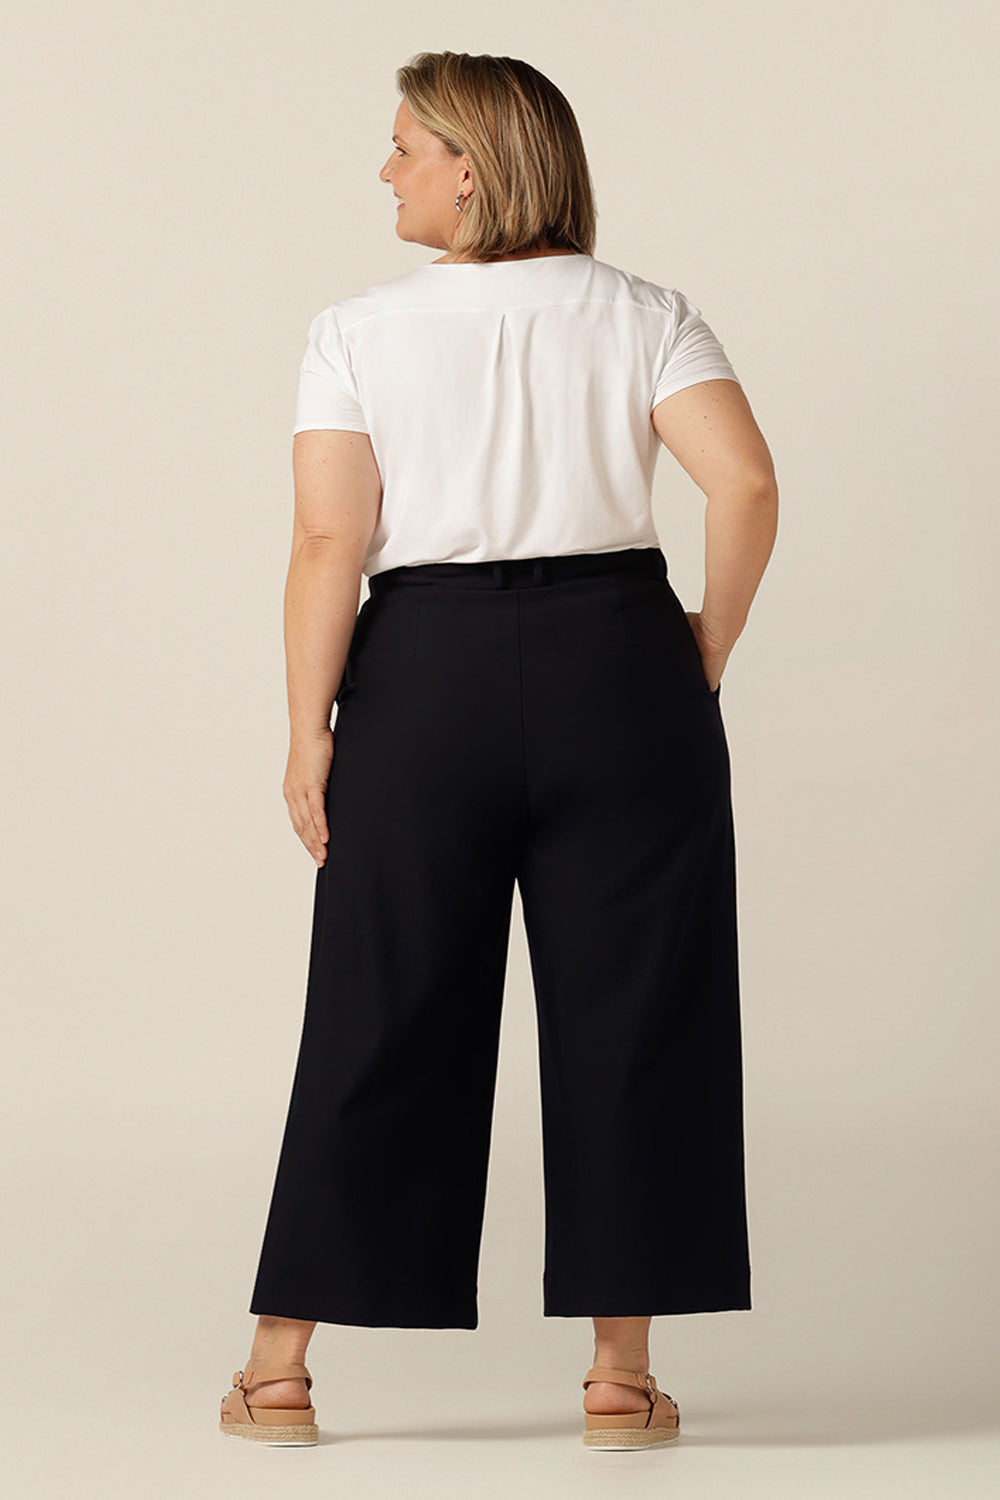 plus size woman wearing work-wear navy wide leg, cropped tailored pant with pockets styled with white bamboo jersey short-sleeve top 